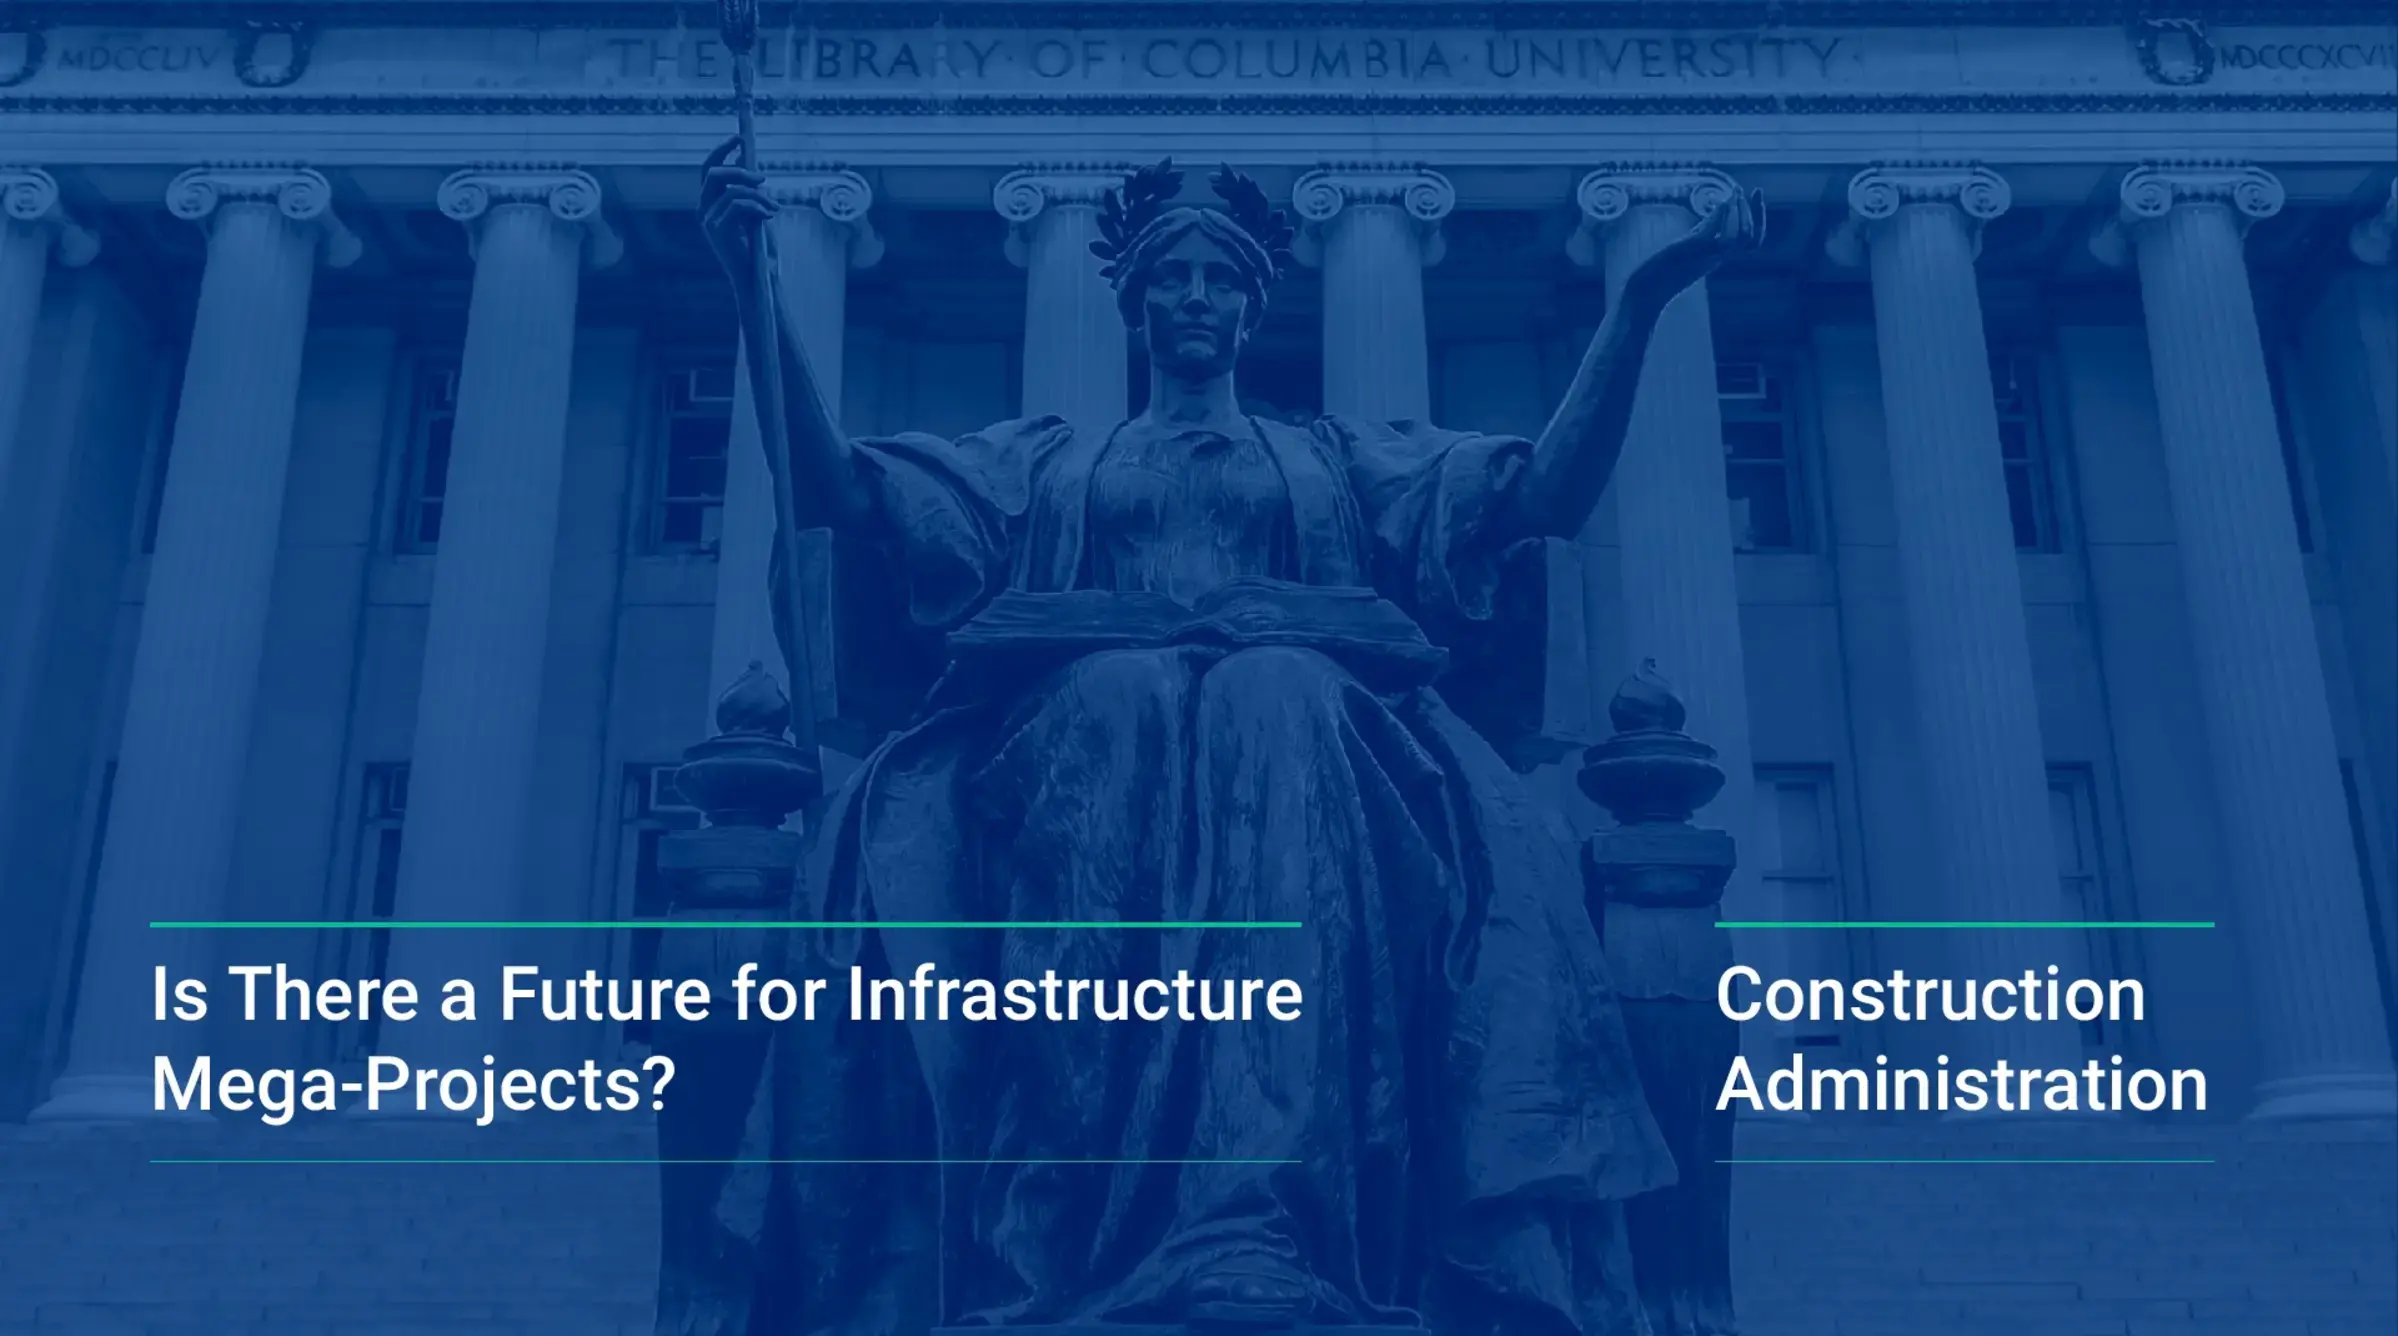 Is There a Future for Infrastructure Mega-Projects?